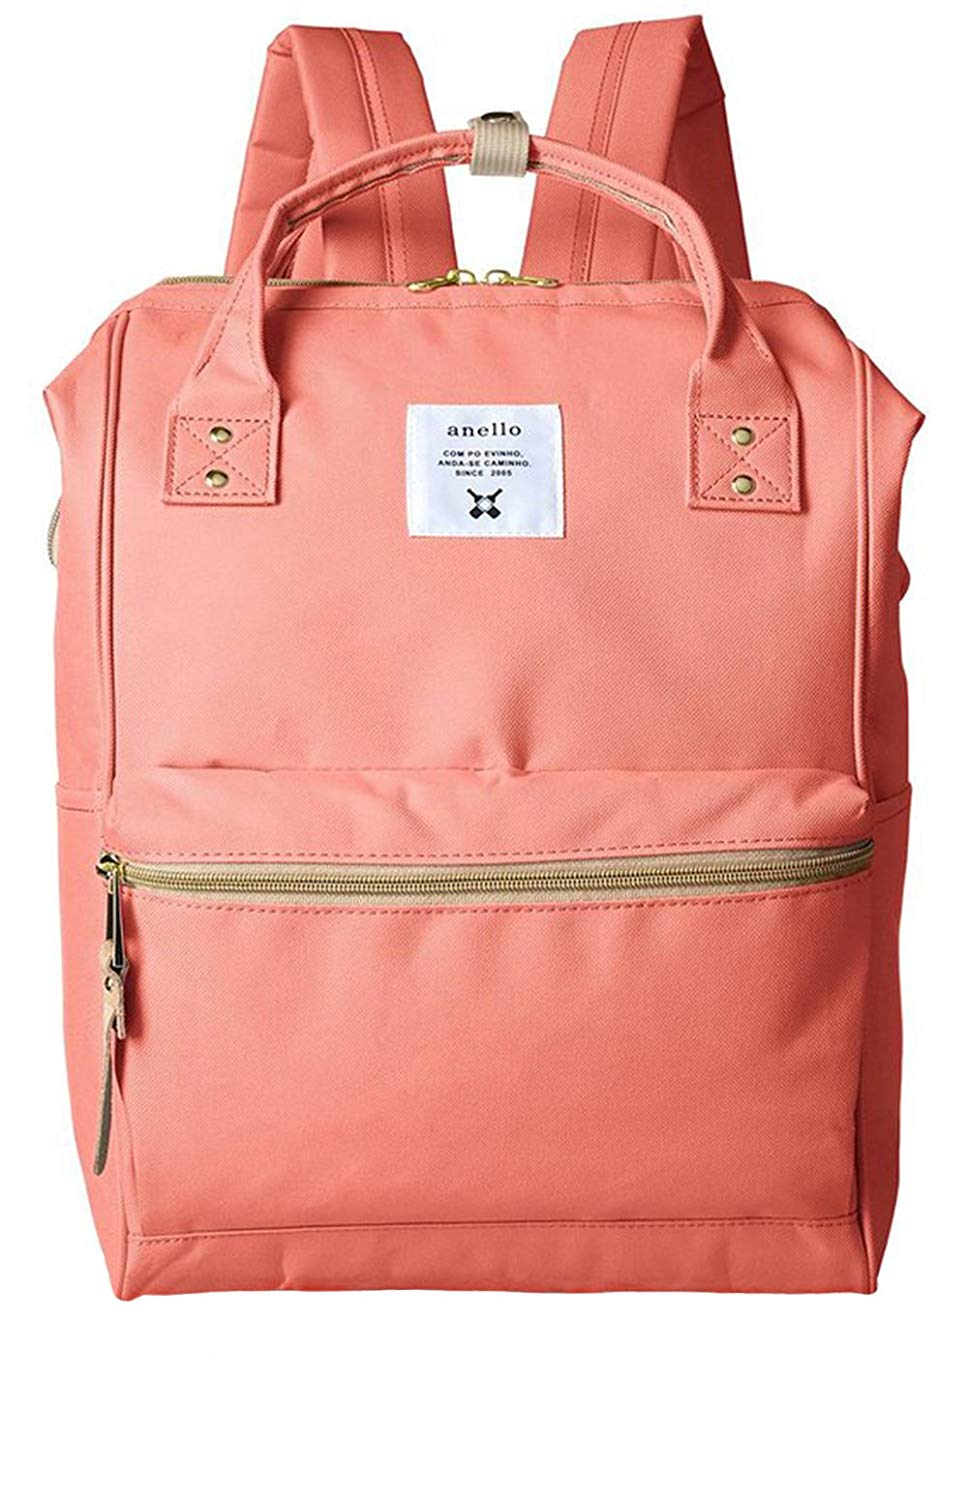 Salmon pink anello backpack on a white background.